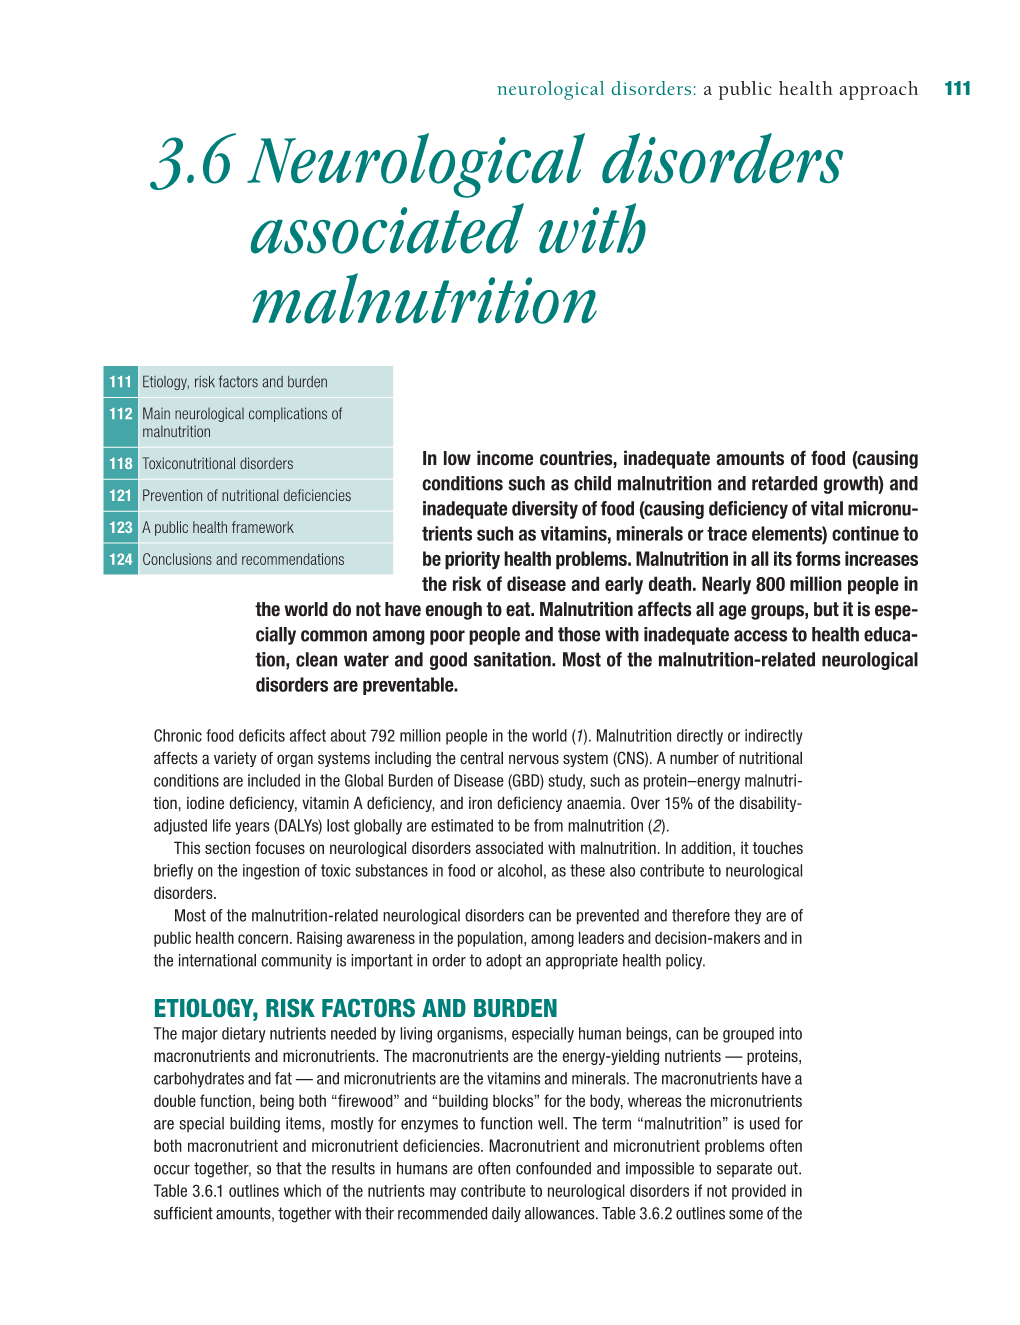 3.6 Neurological Disorders Associated with Malnutrition